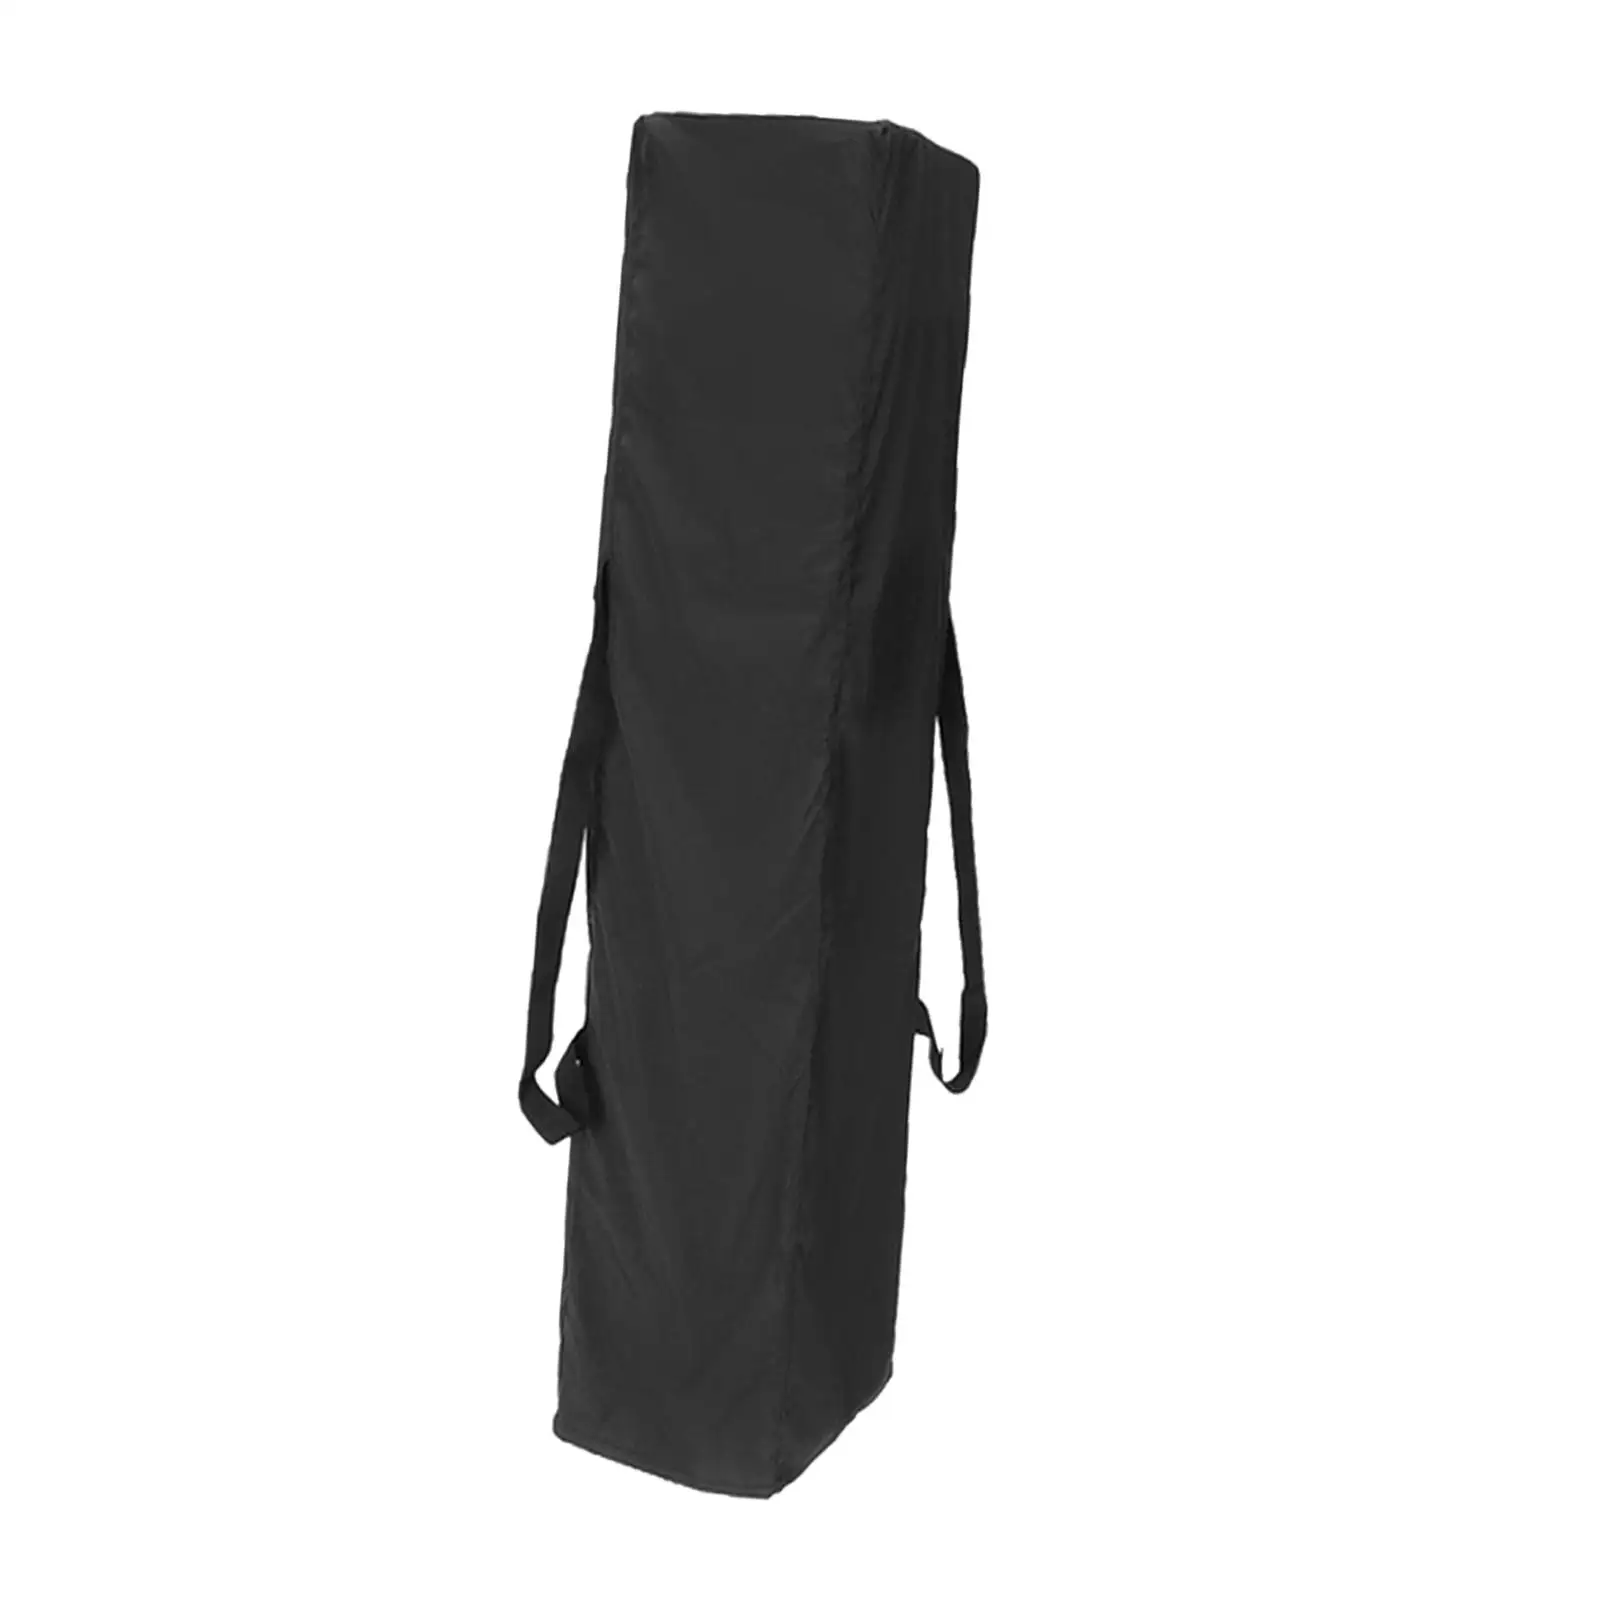  Roller Bag for Up Canopy Tent Storage Bag with Handle